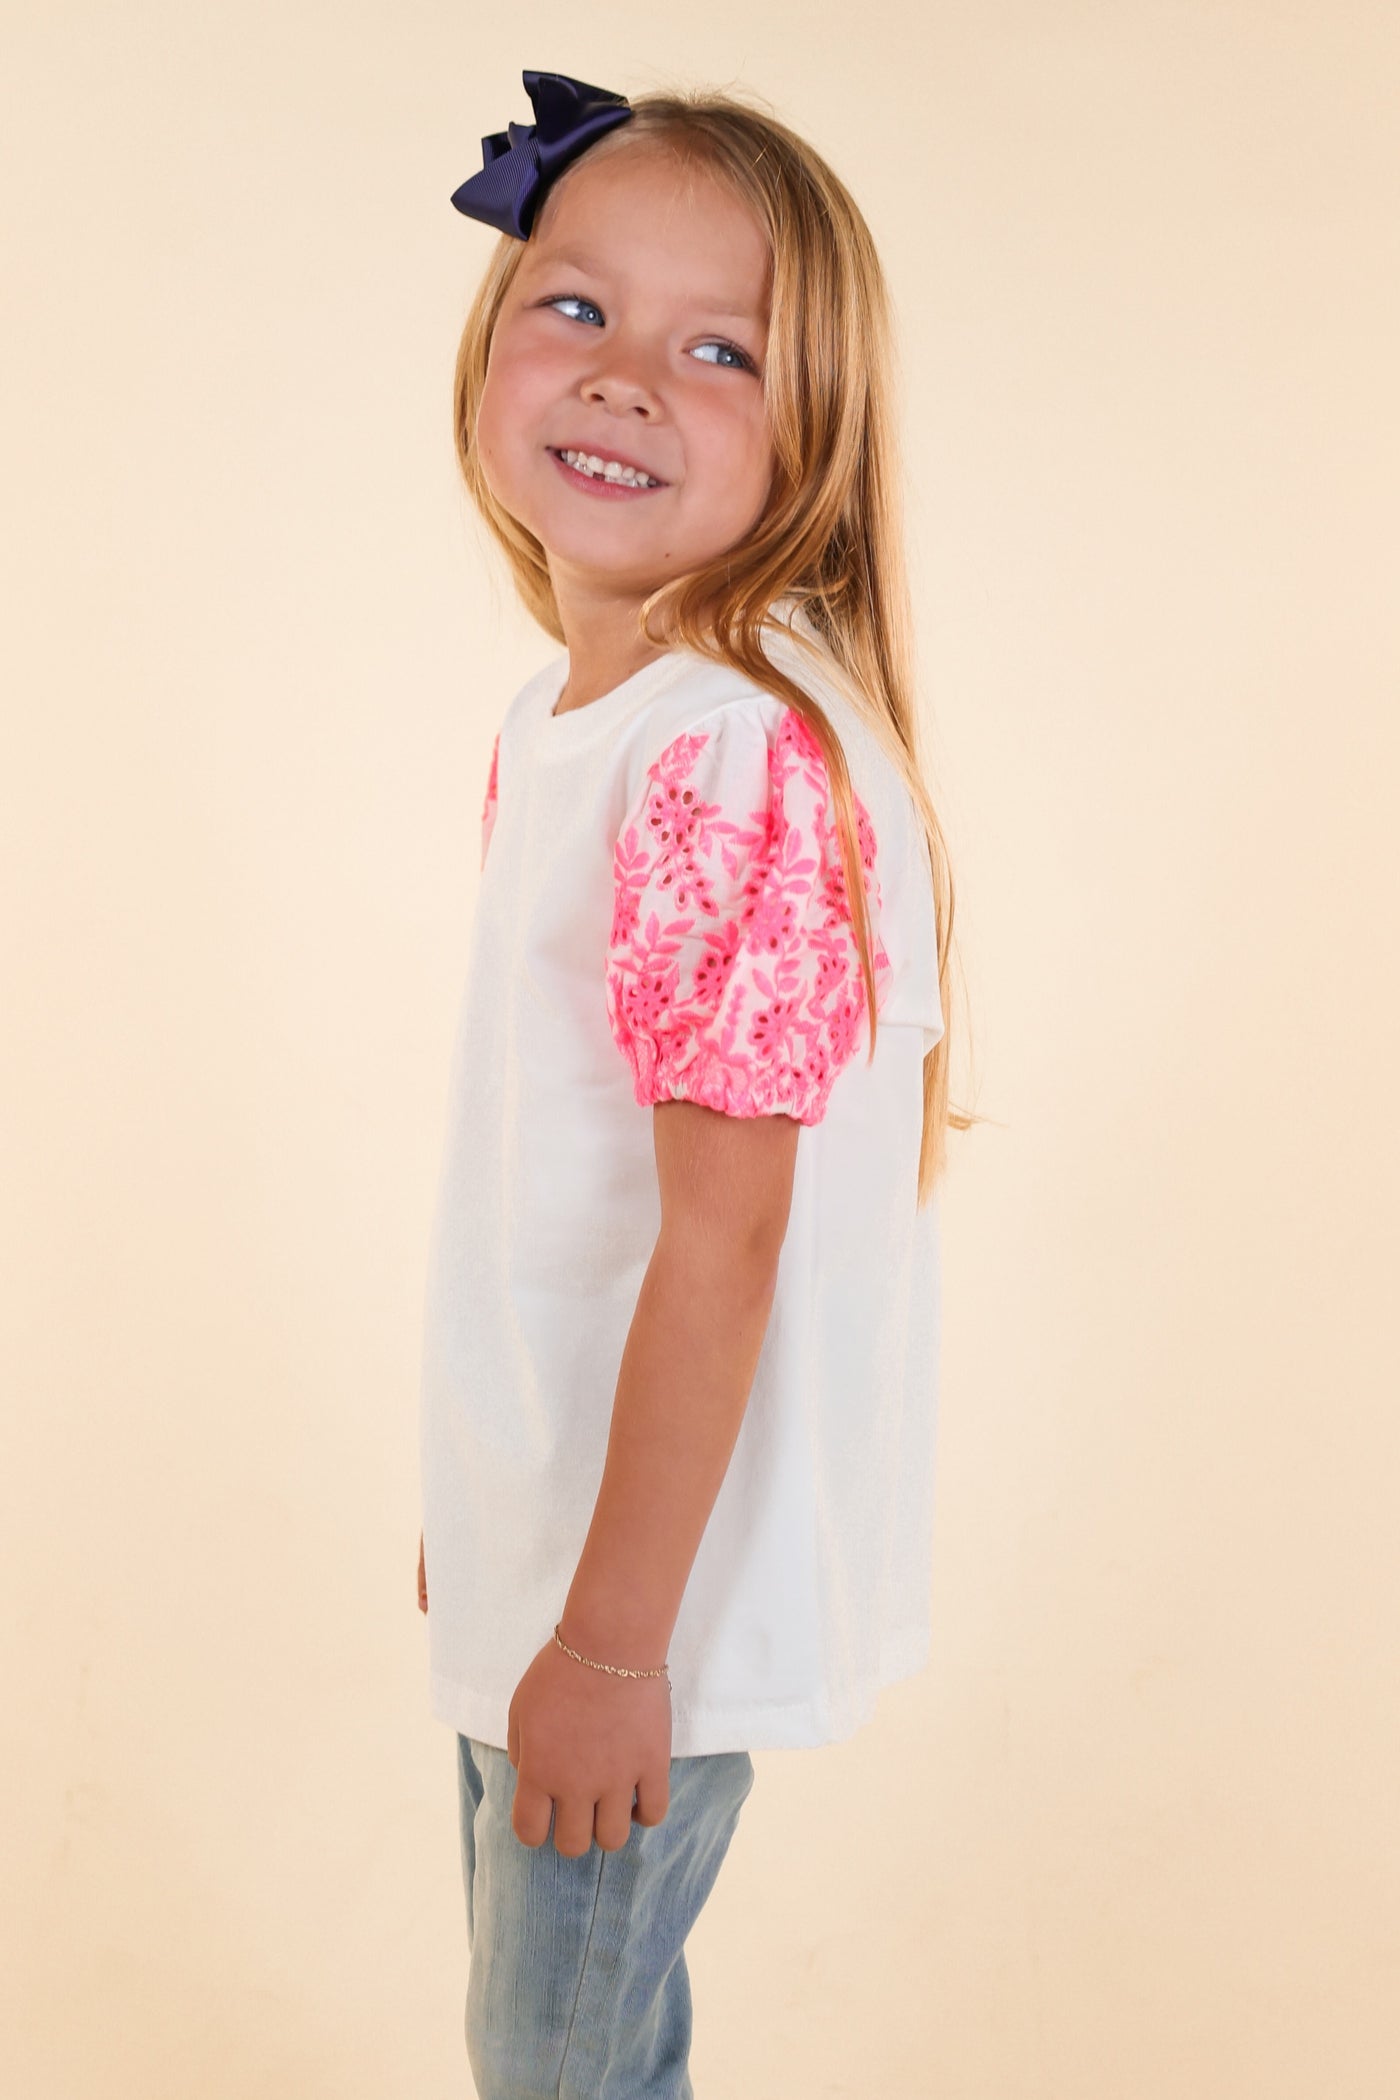 Girls White Top With Pink Eyelet Sleeves